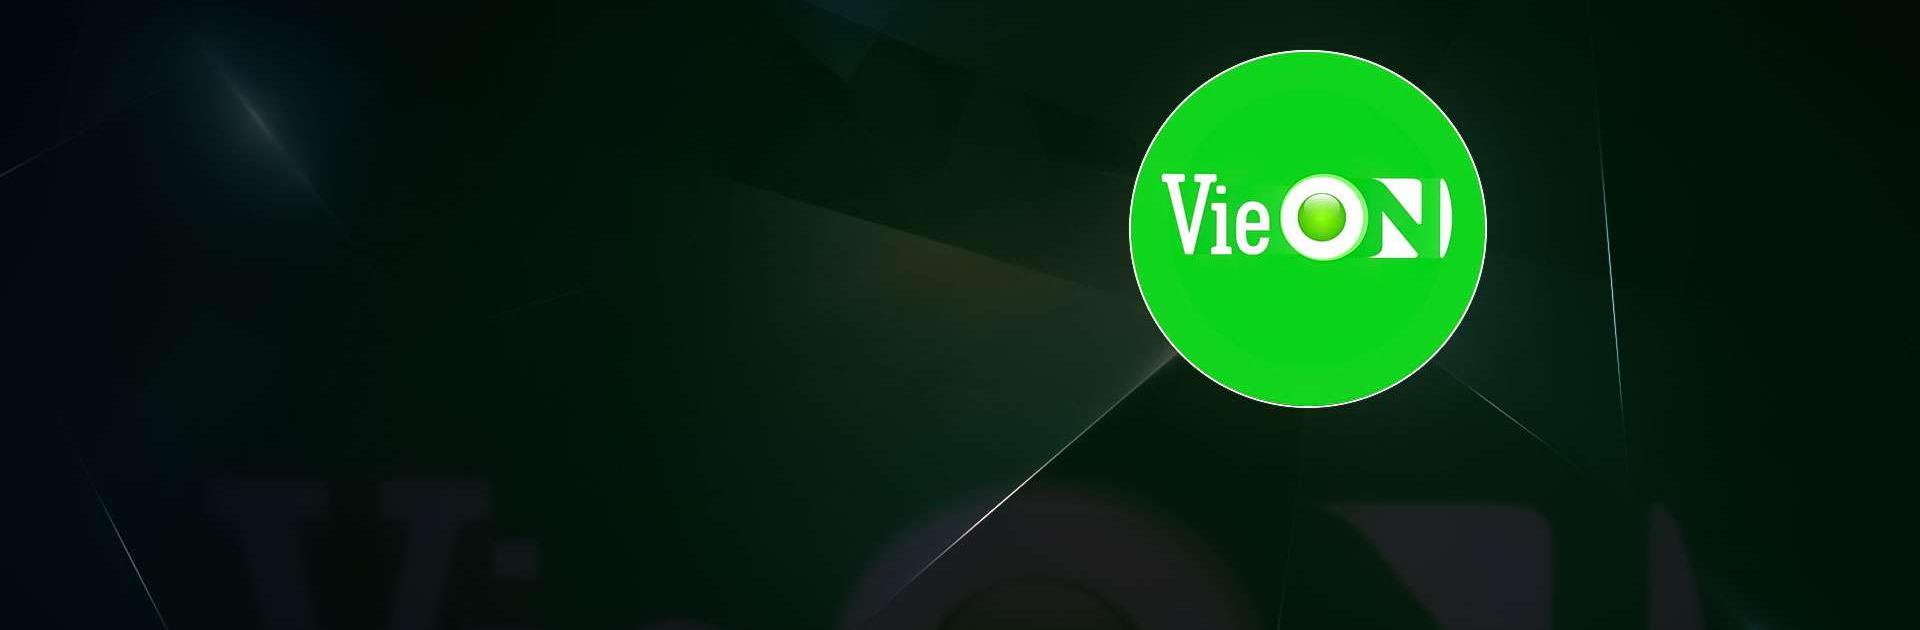 VieON for Android TV